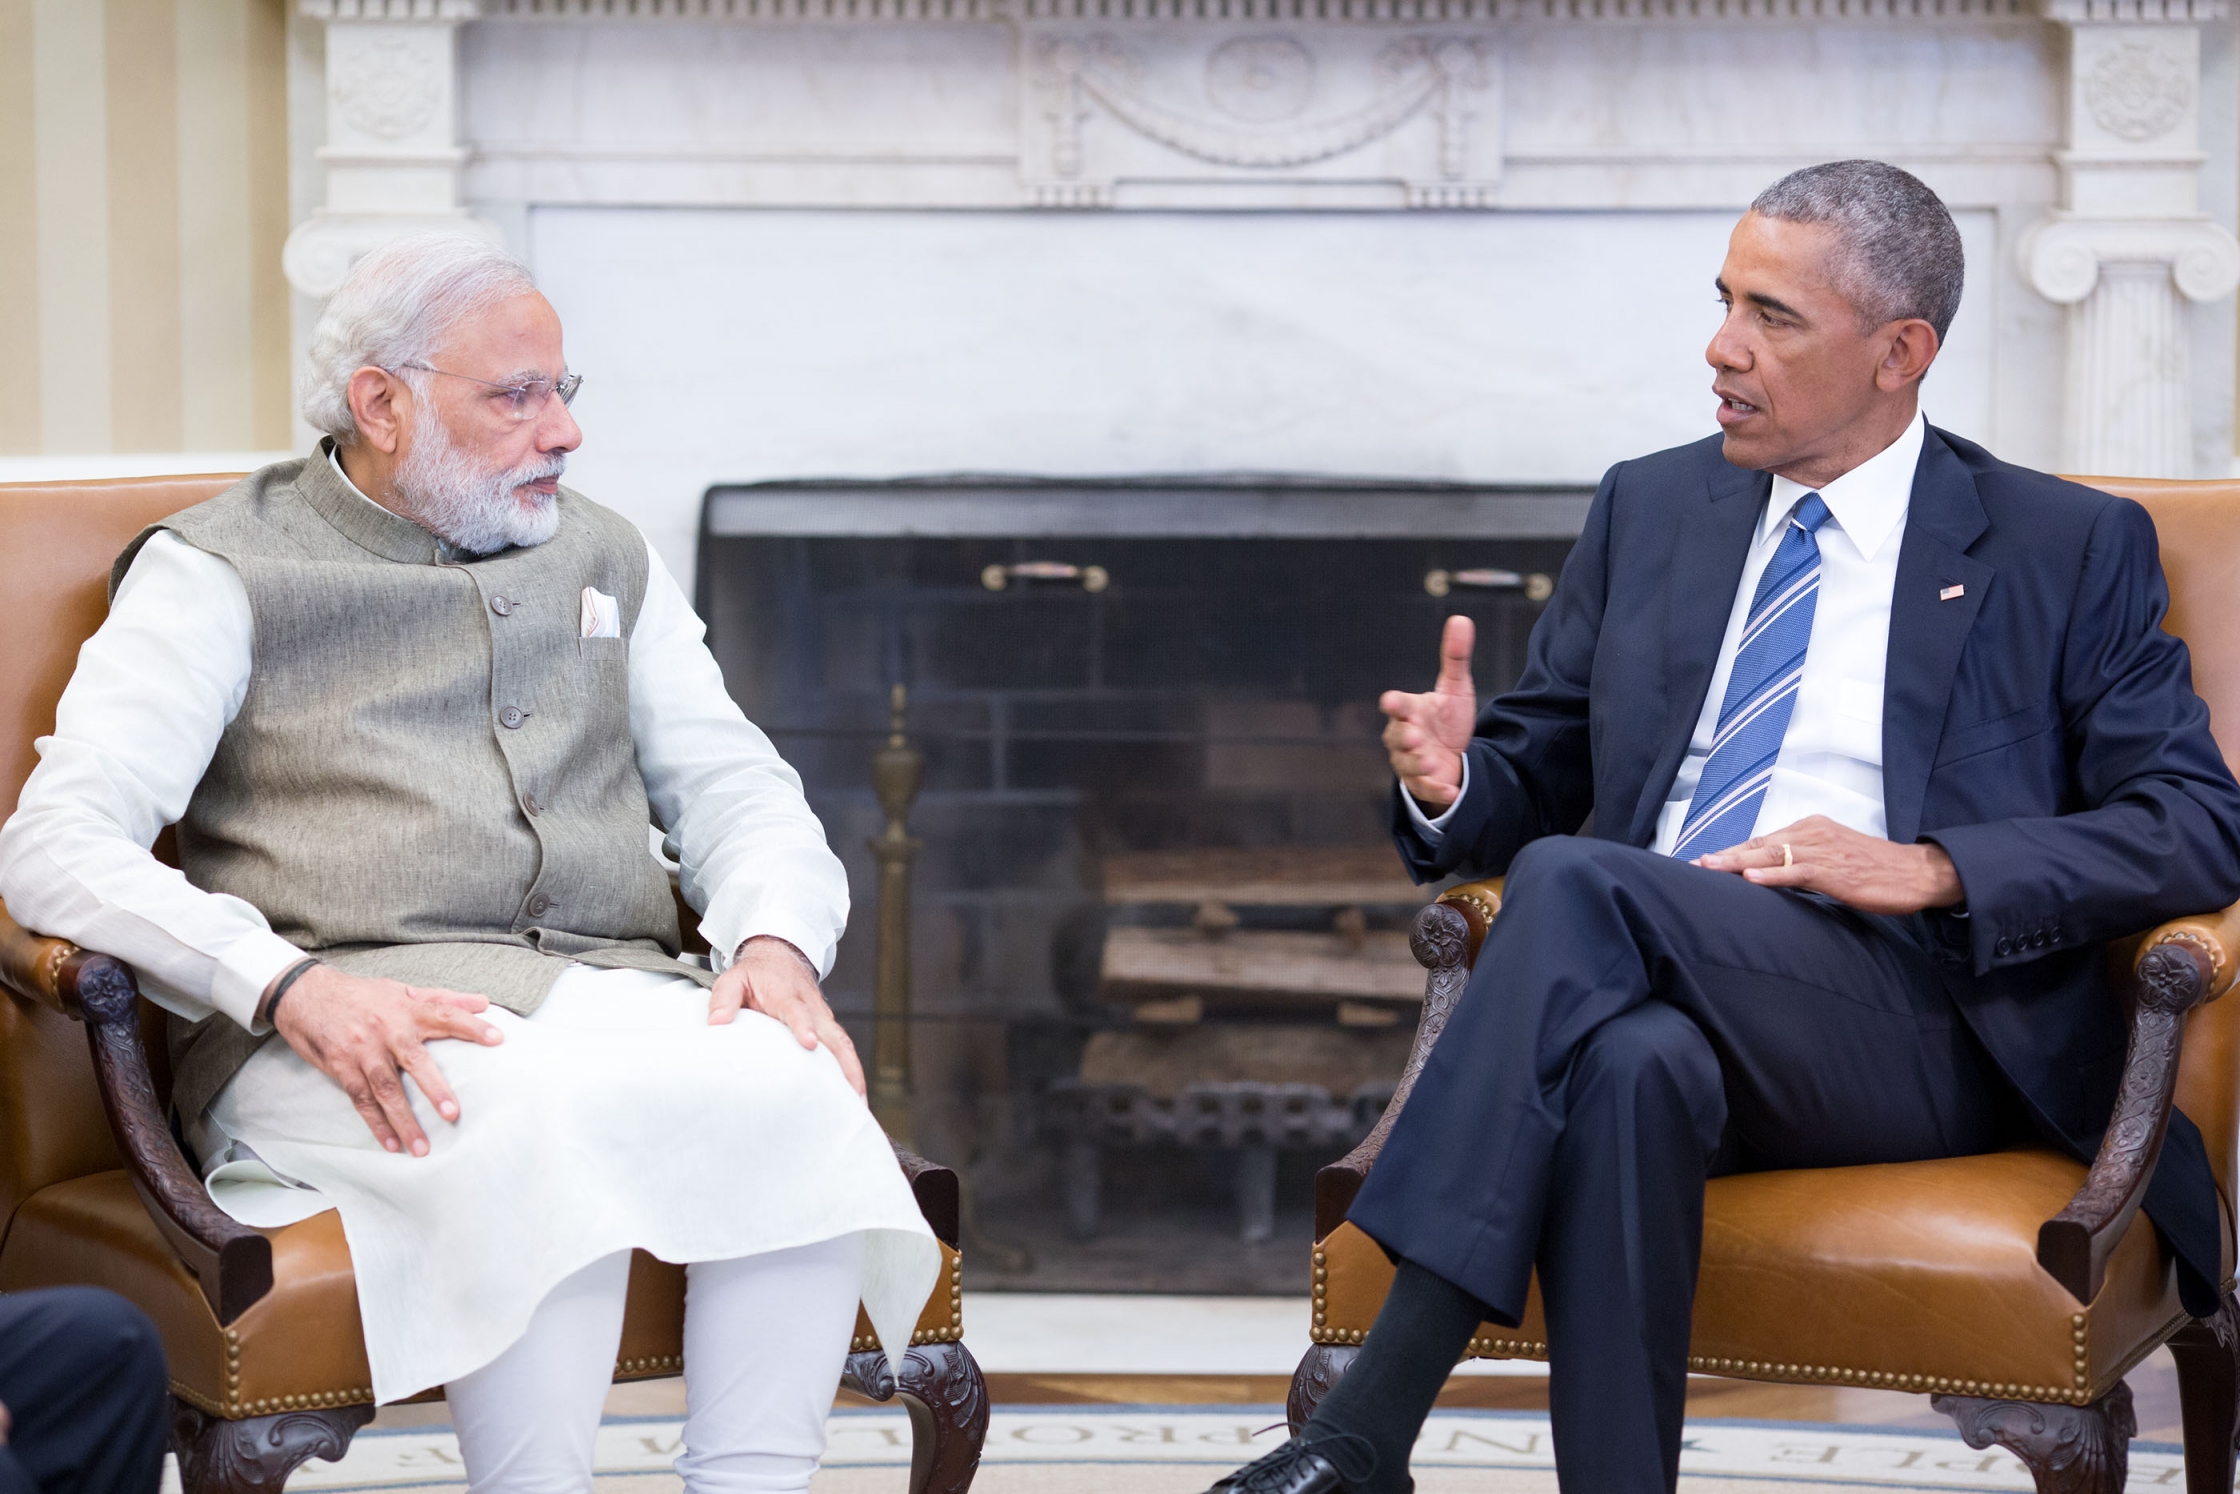 Prime Minister Modi of India meets with the President